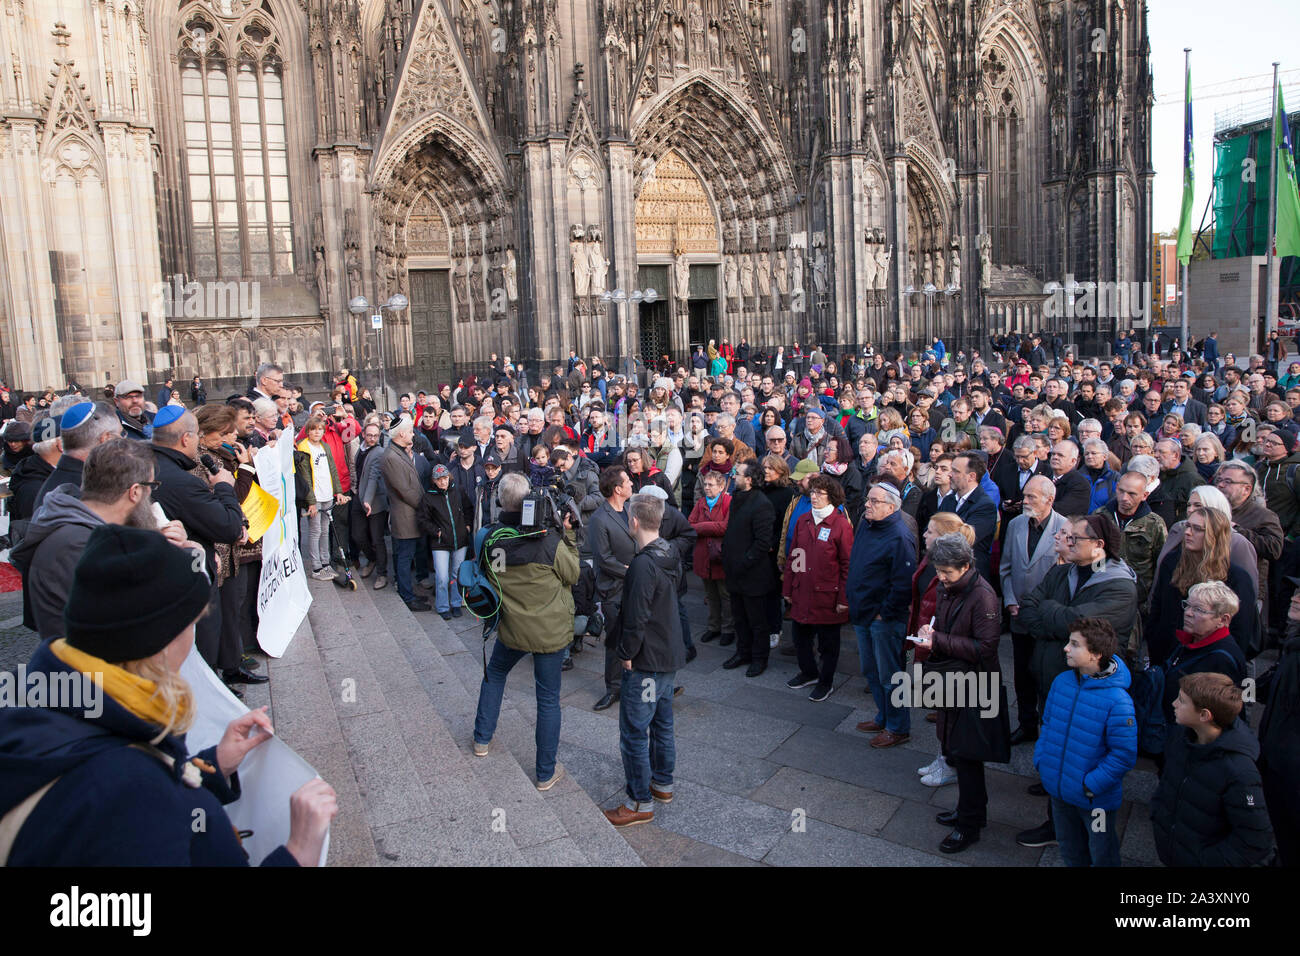 Cologne, Germany, October 10, 2019. After the attack by a right-wing extremist in Halle (Saale), politicians, churches and Muslims demonstrate their s Stock Photo